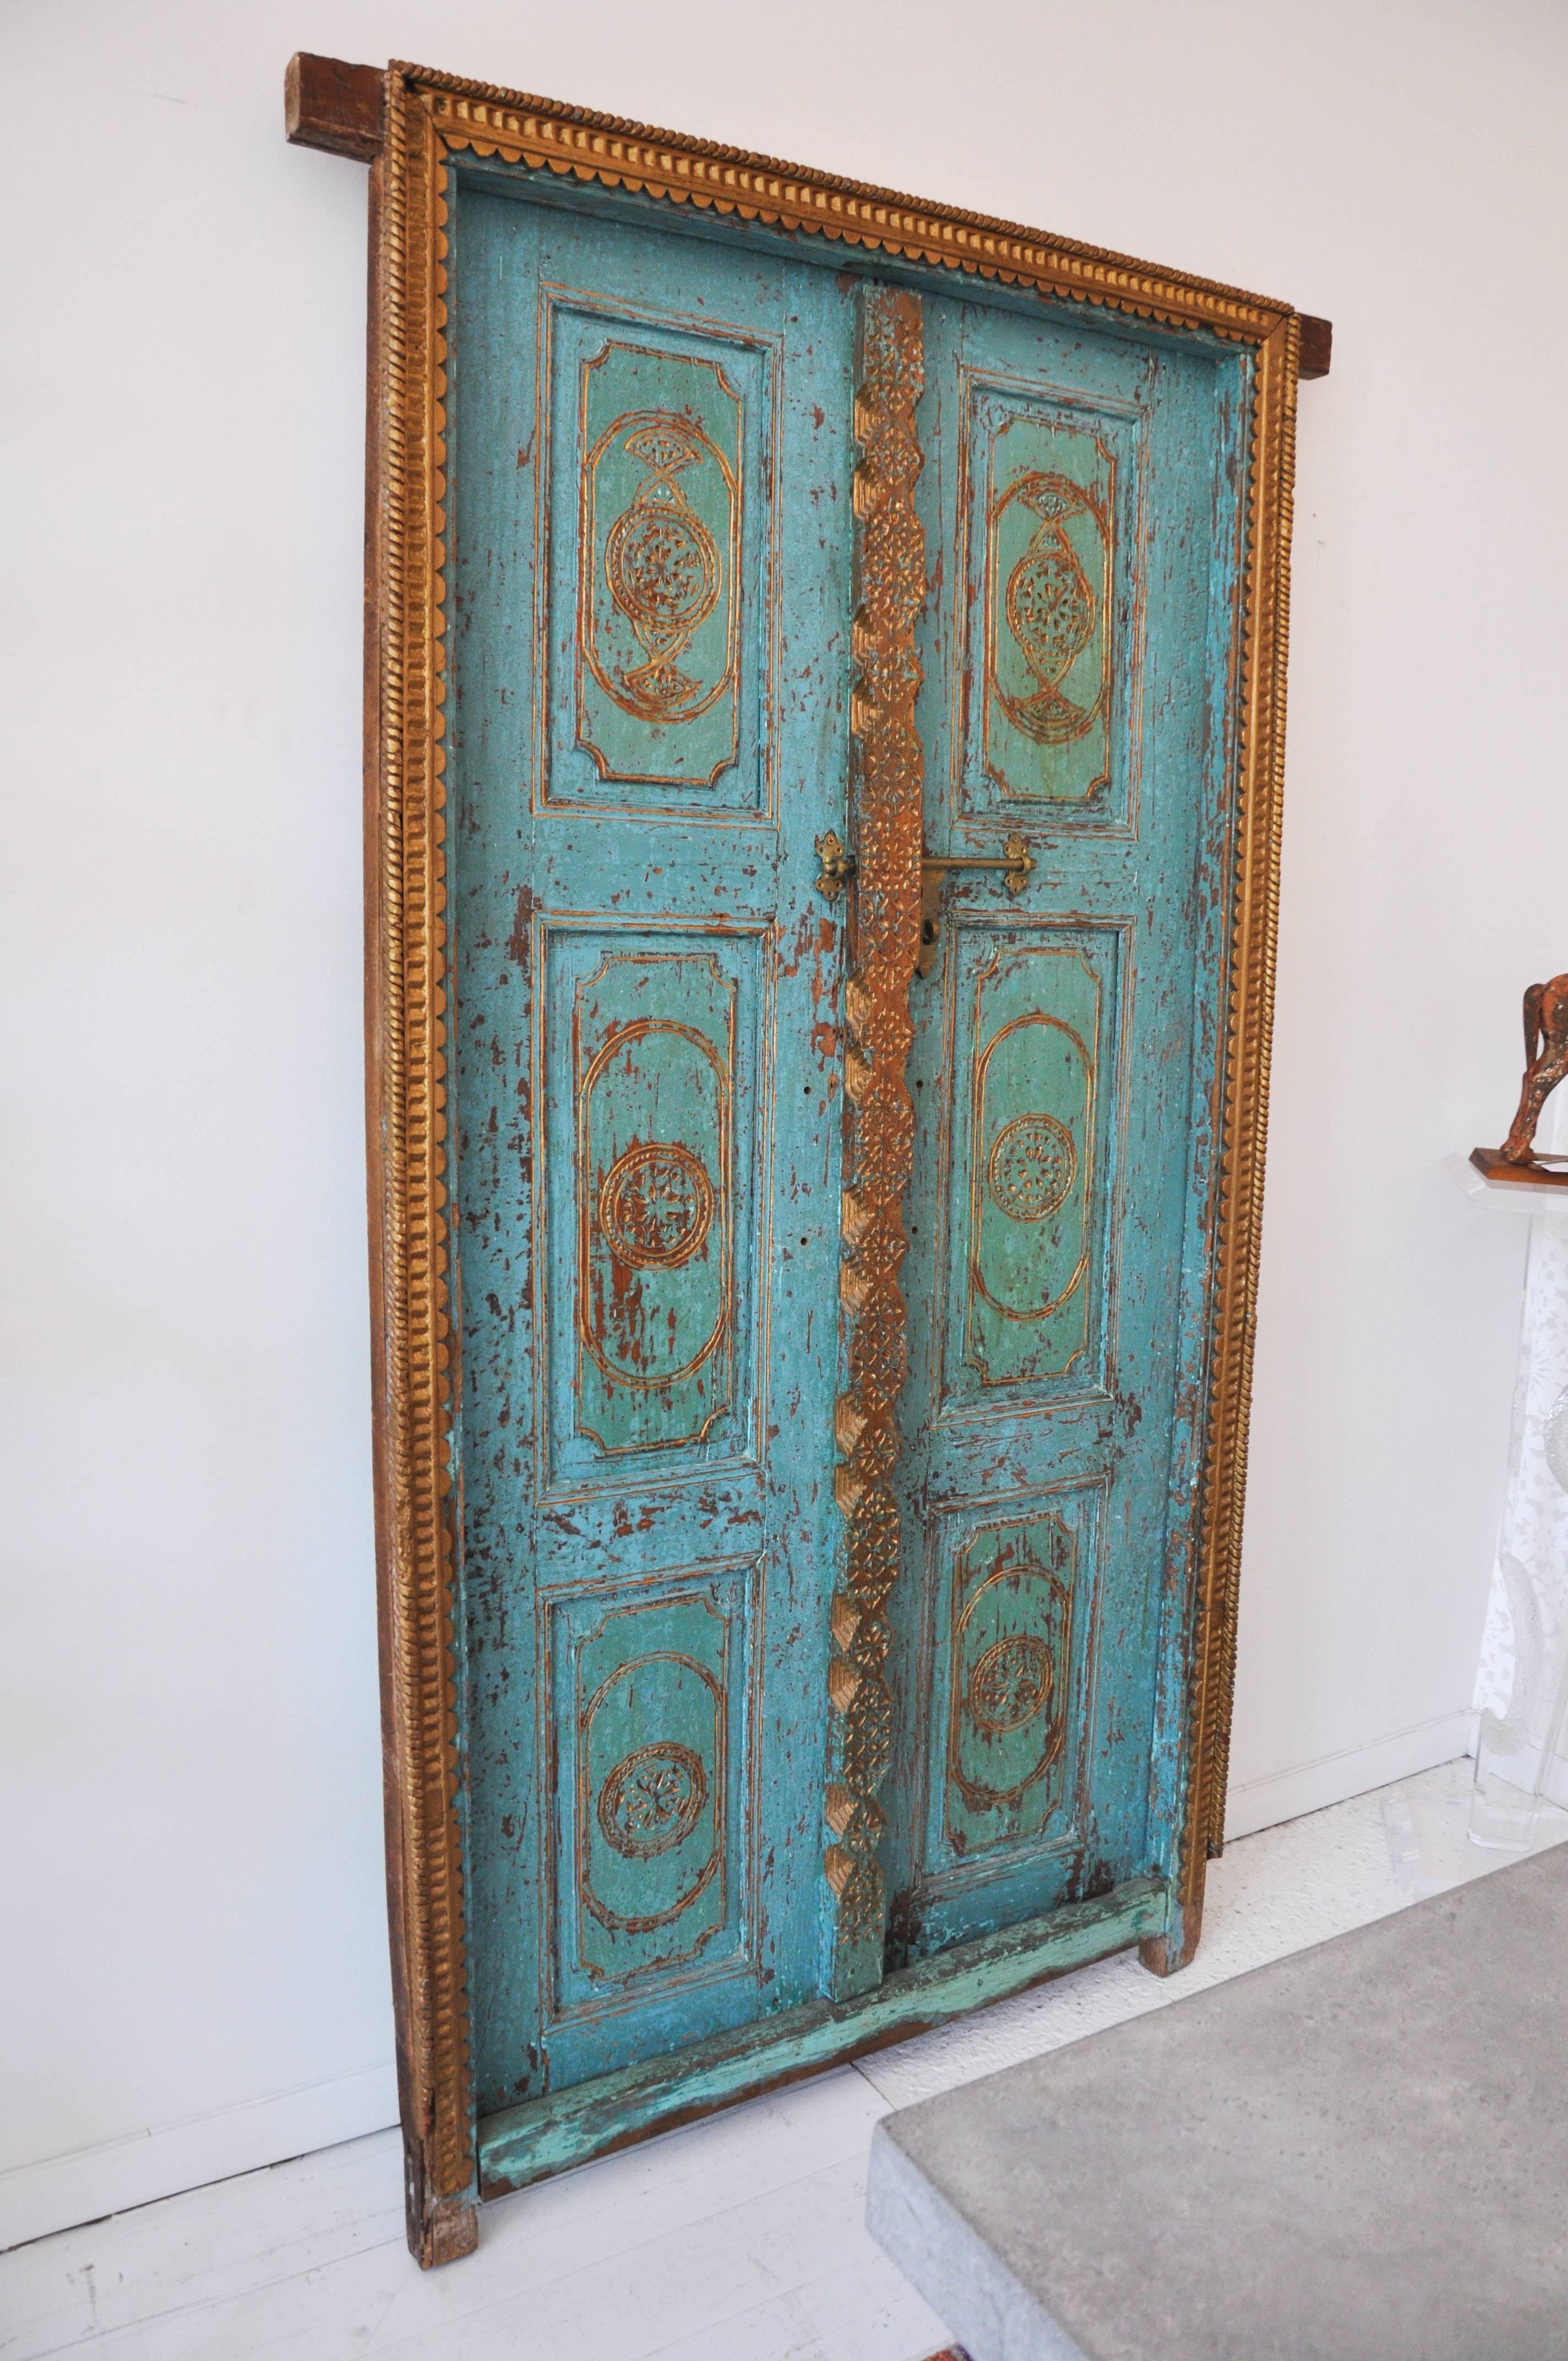 Pair of exquisite salvaged doors from India. The colors, gilded frame and original hardware are quite breathtaking.